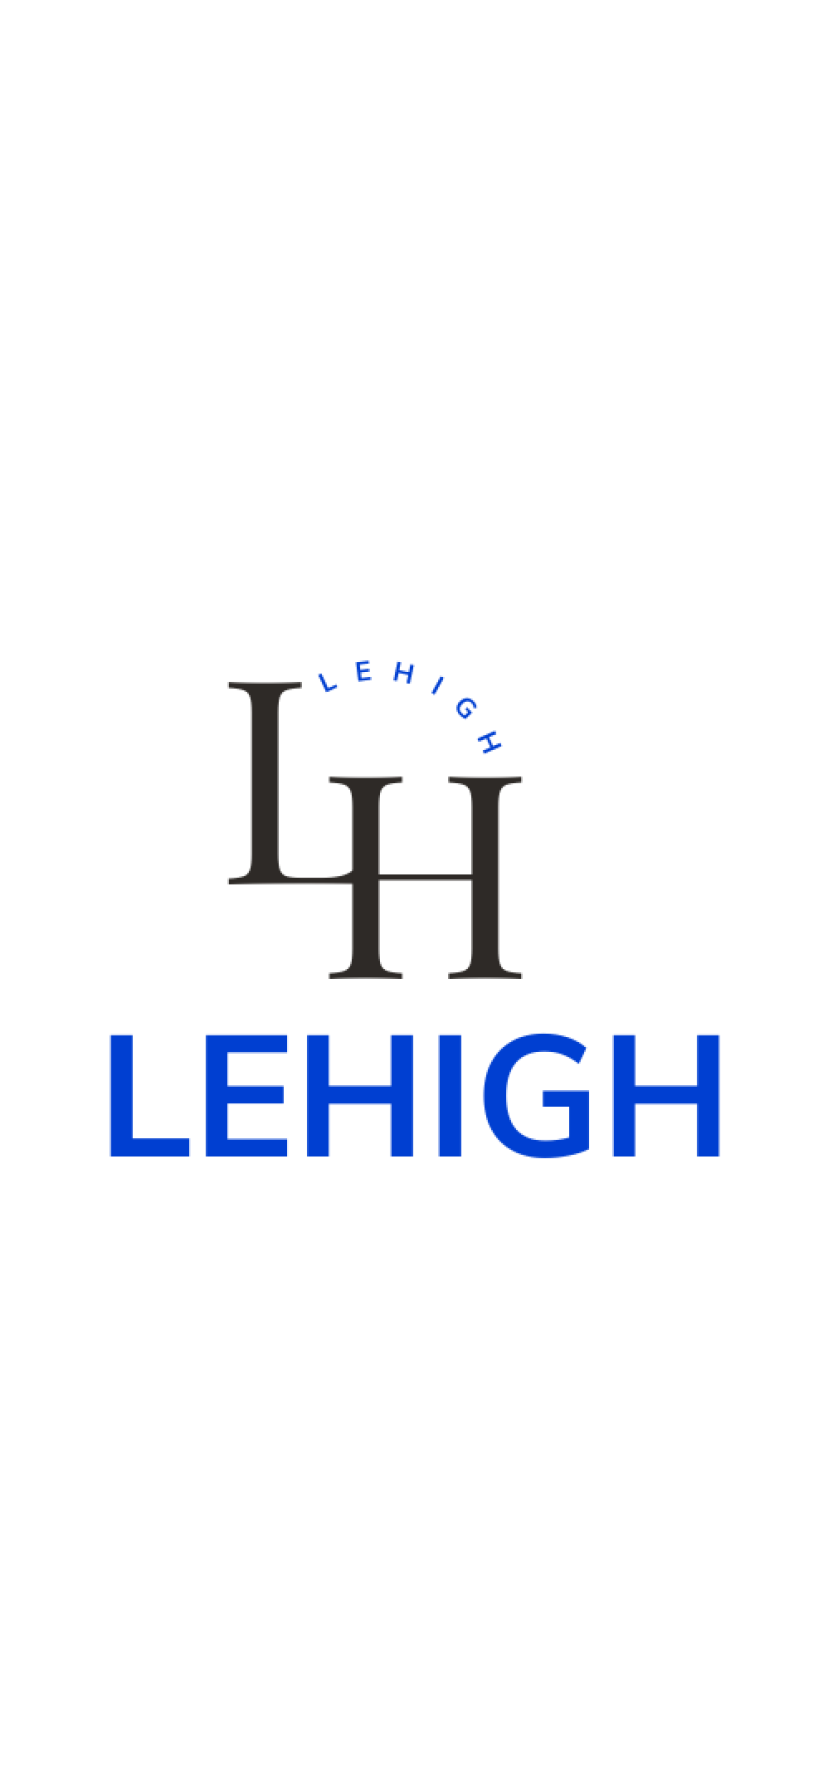 Lehigh.co Domain Name is For Sale